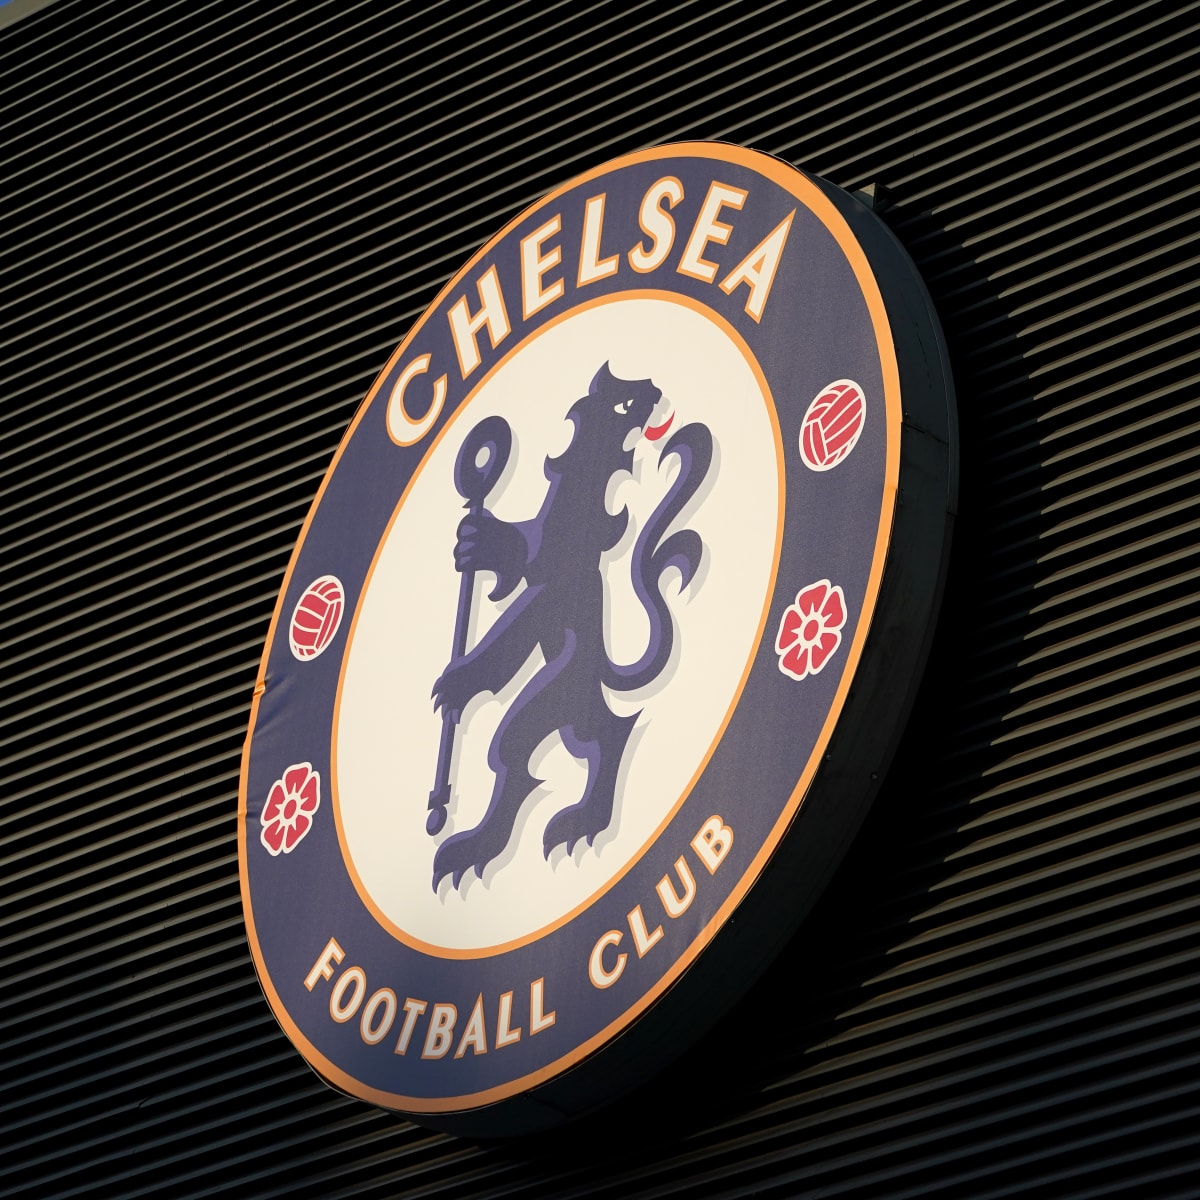 Confirmed: Chelsea to play Club World Cup in early 2022 in UAE Illustrated Chelsea FC News, Analysis and More